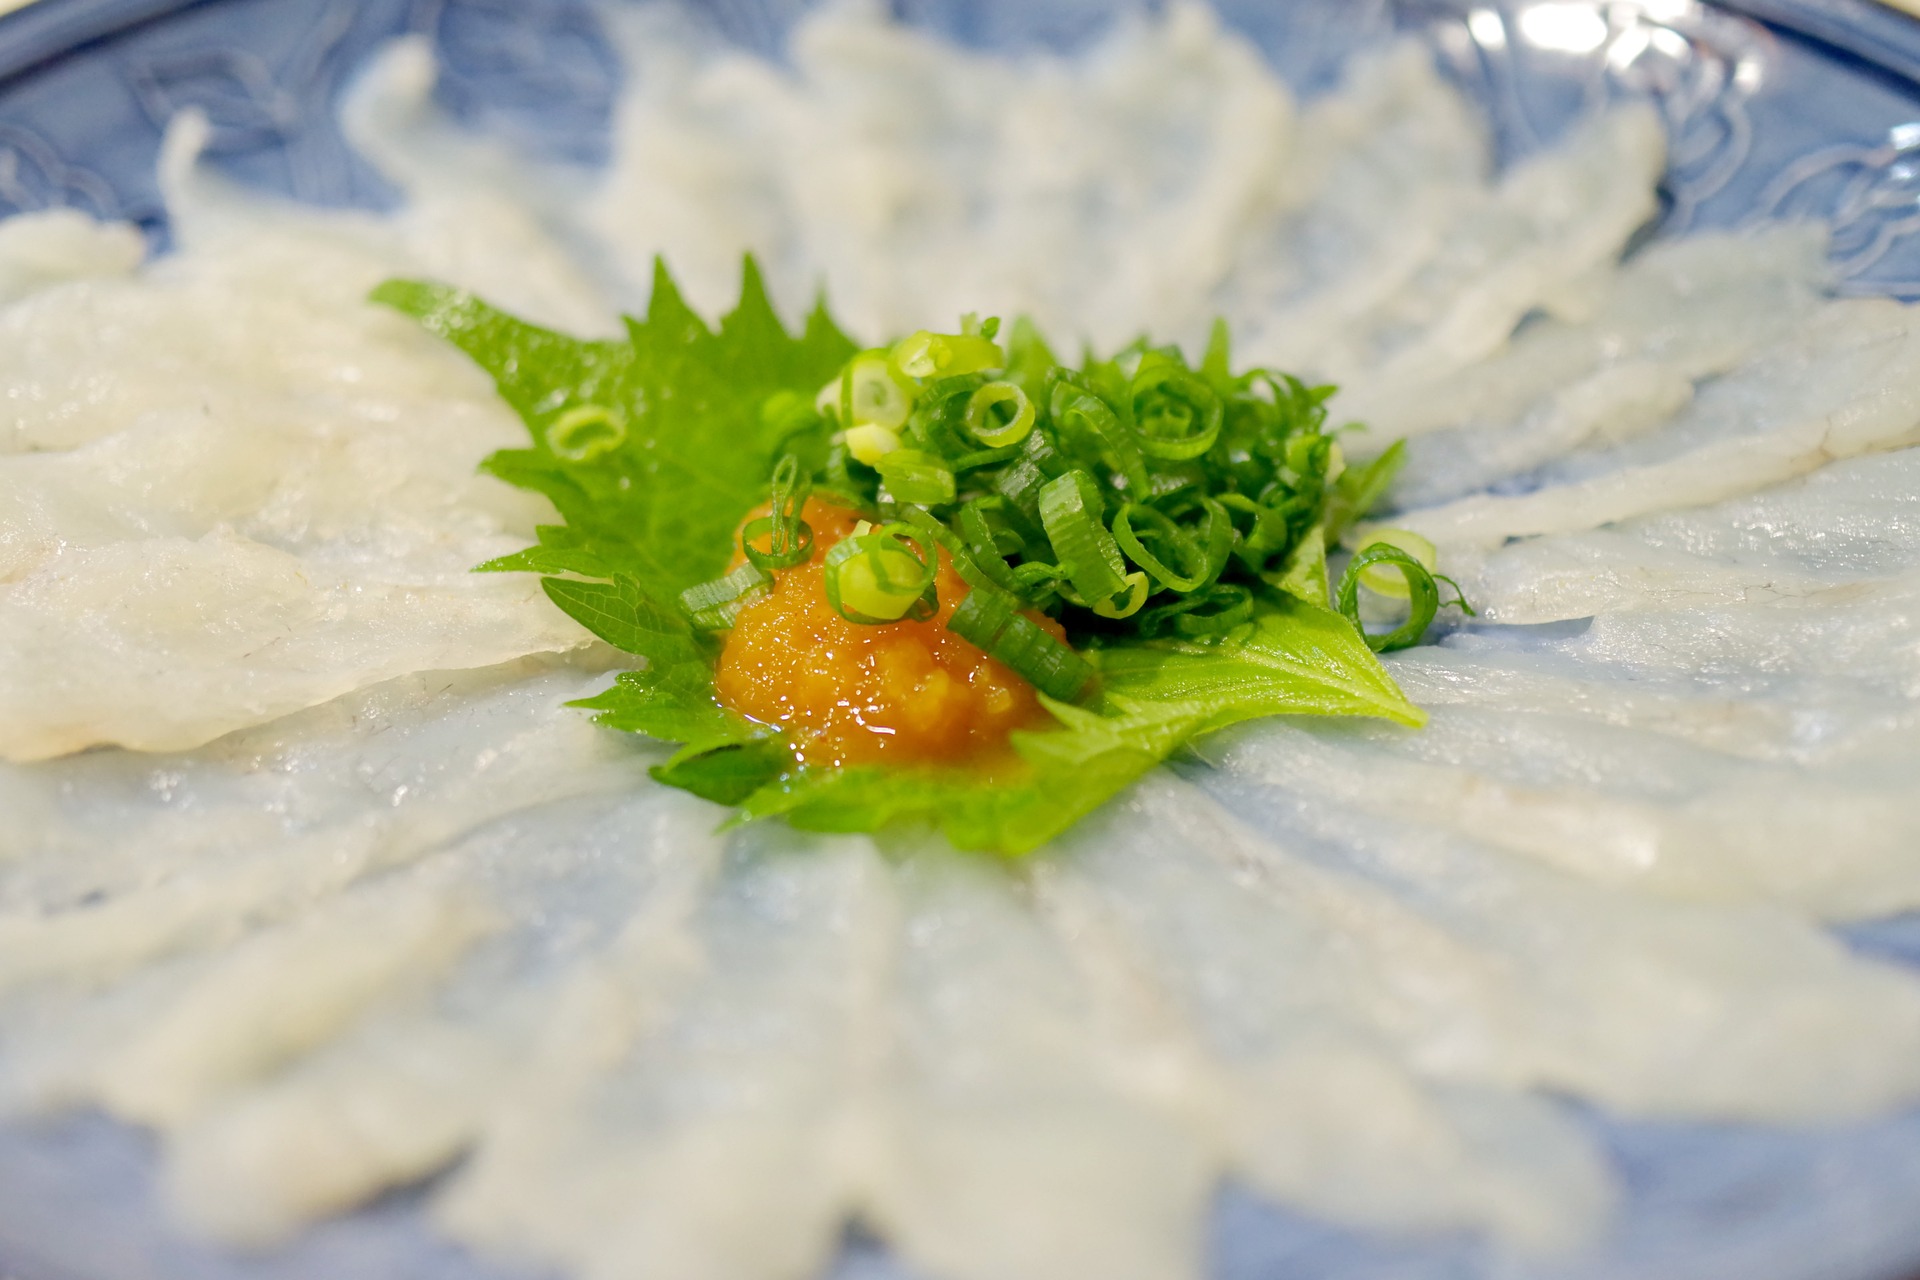 Fugu – A Japanese Fish More Poisonous Than Cyanide